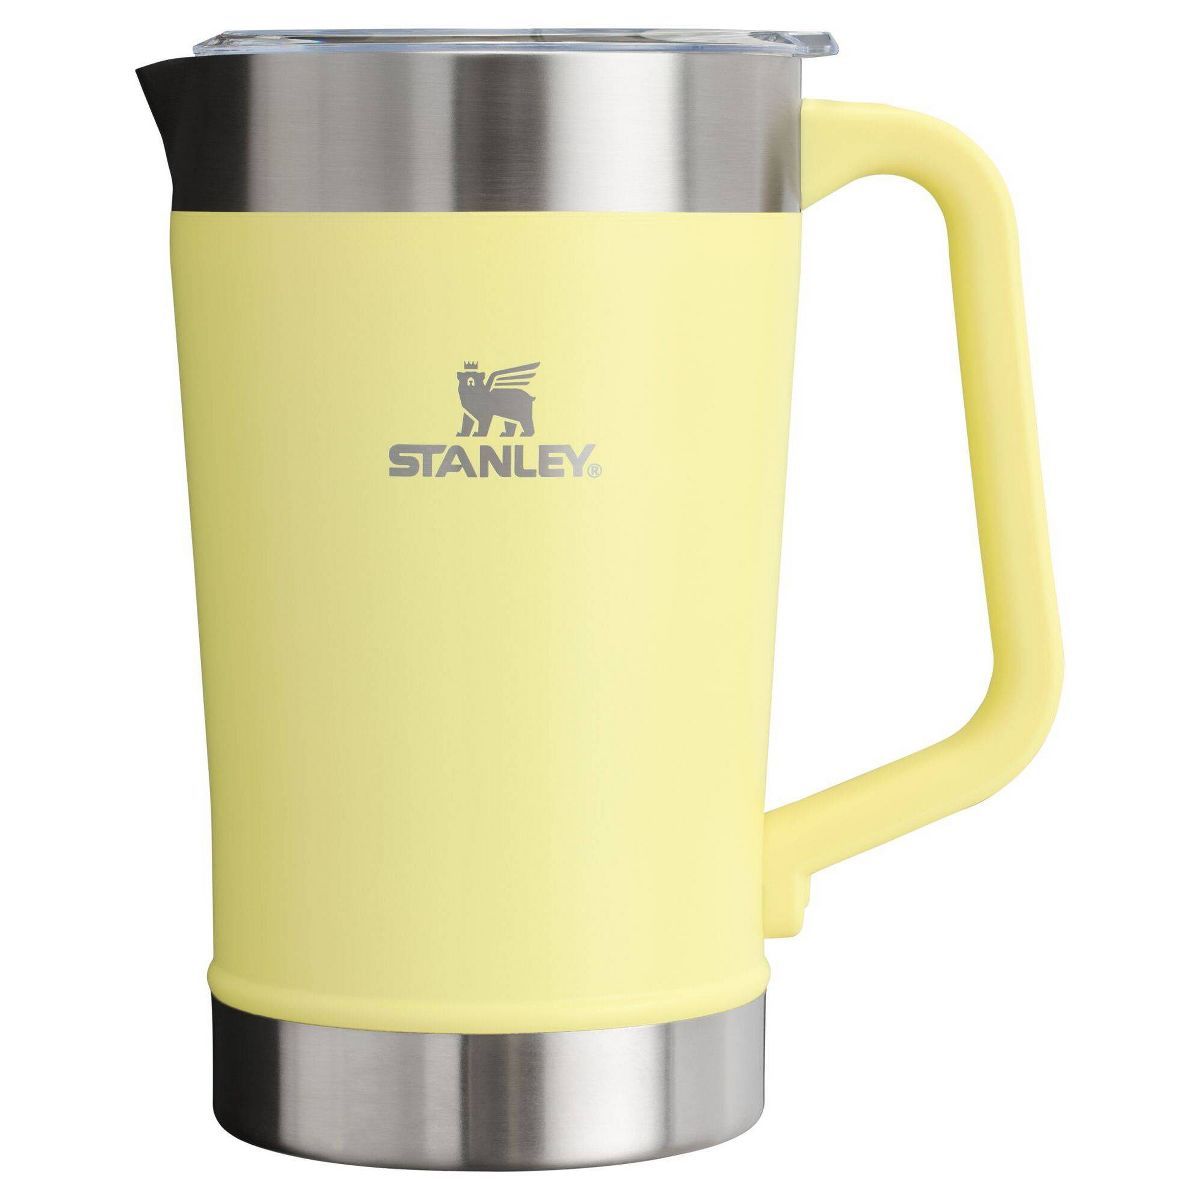 Stanley 64 oz Stainless Steel Stay-Chill Pitcher Frost | Target